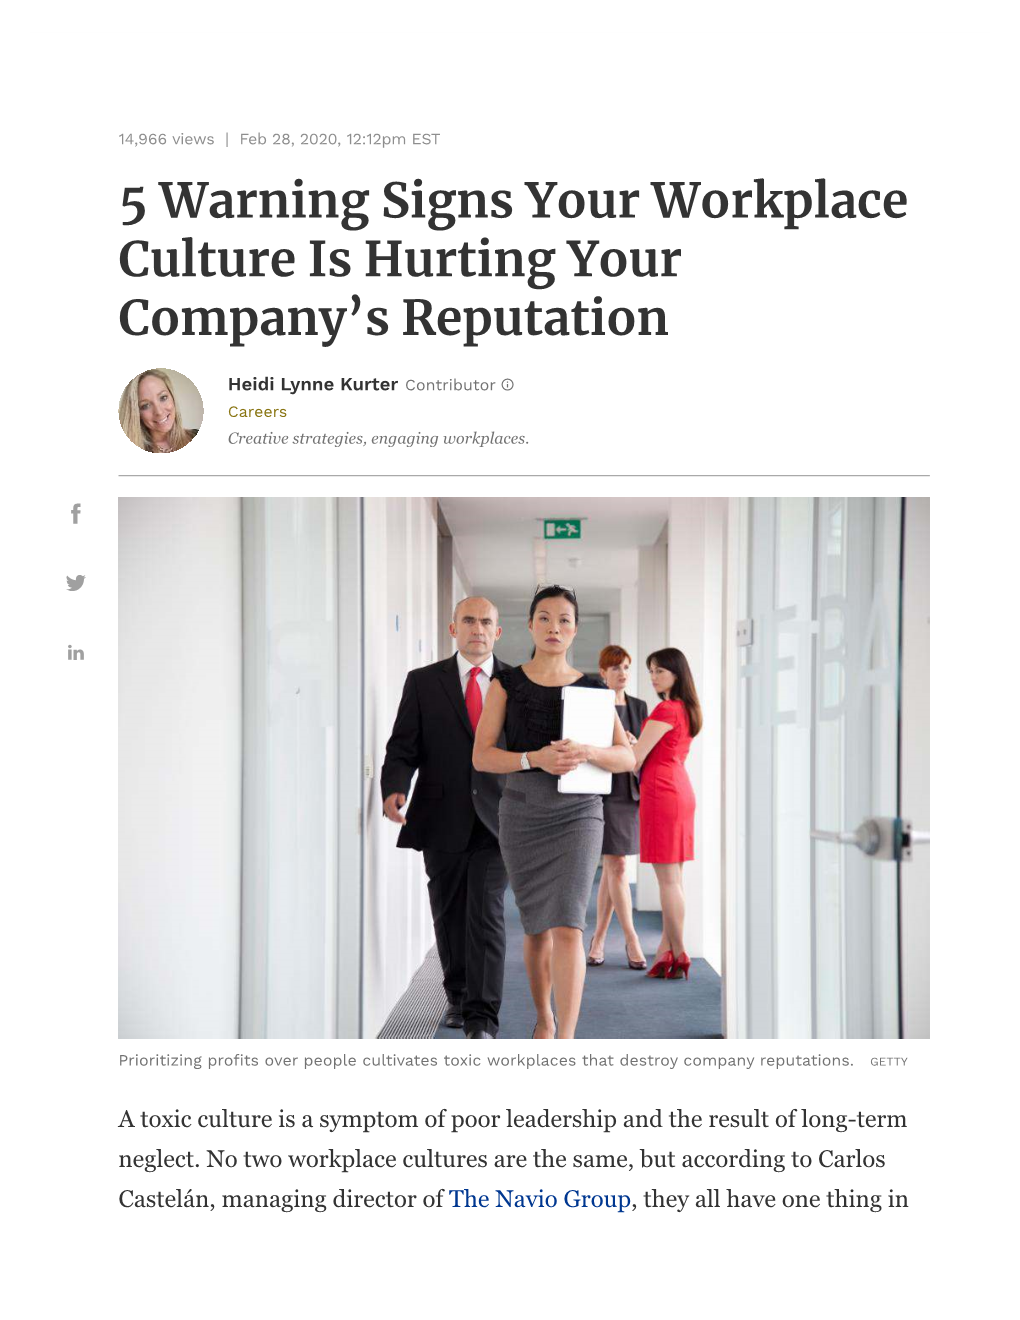 5 Warning Signs Your Workplace Culture Is Hurting Your Company's